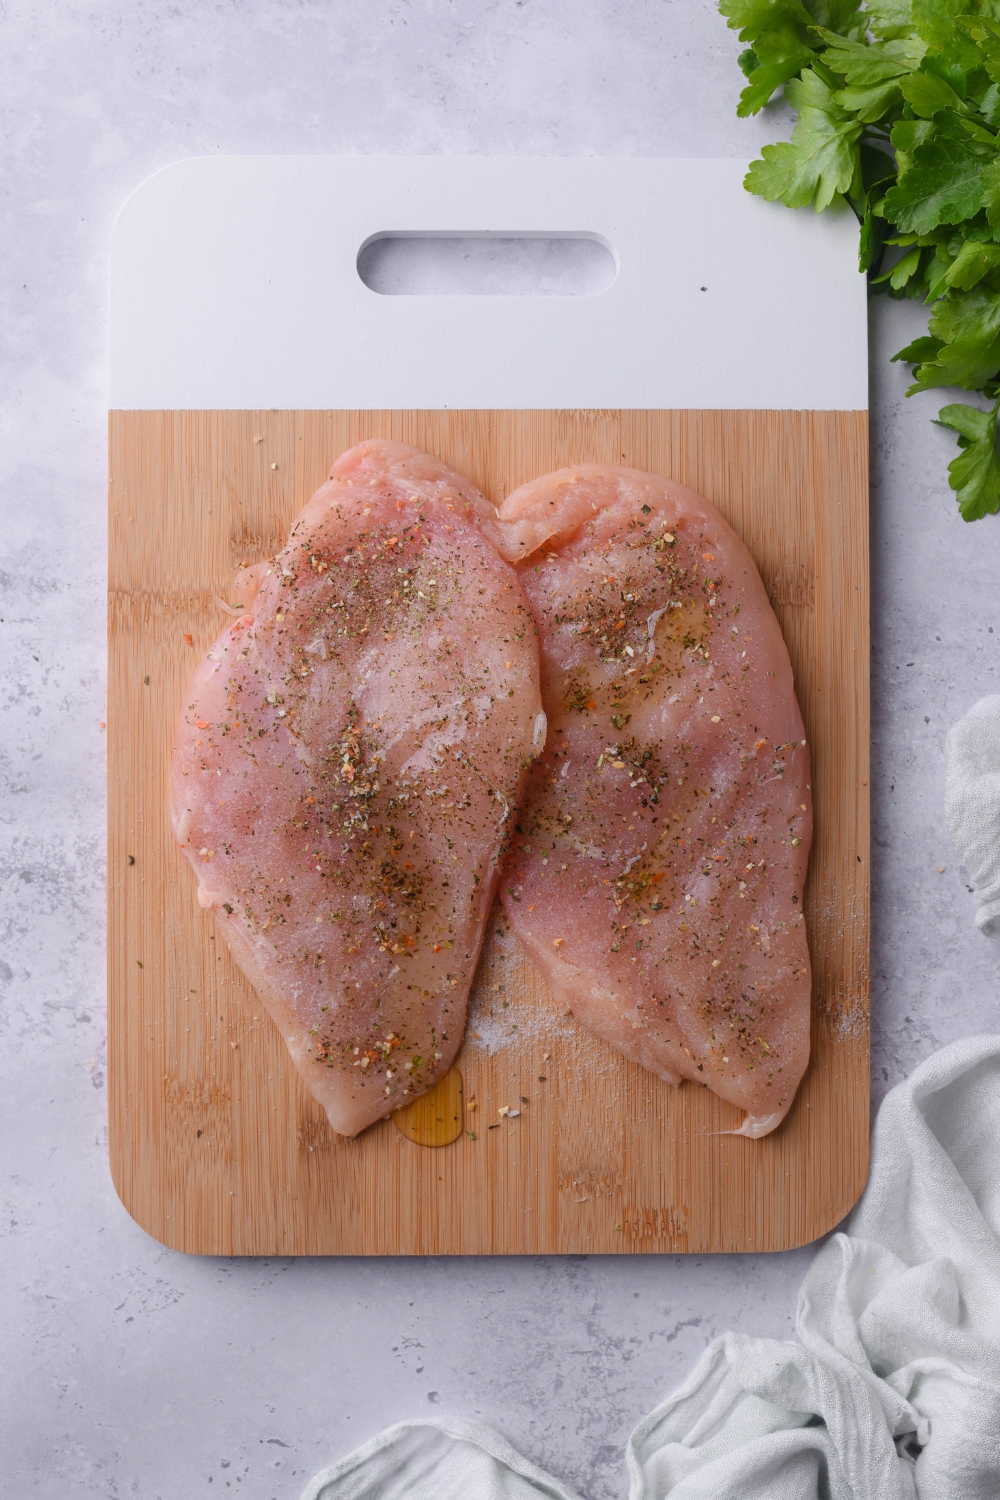 Two raw chicken breast cutlets seasoned with salt and pepper on a wood cutting board.